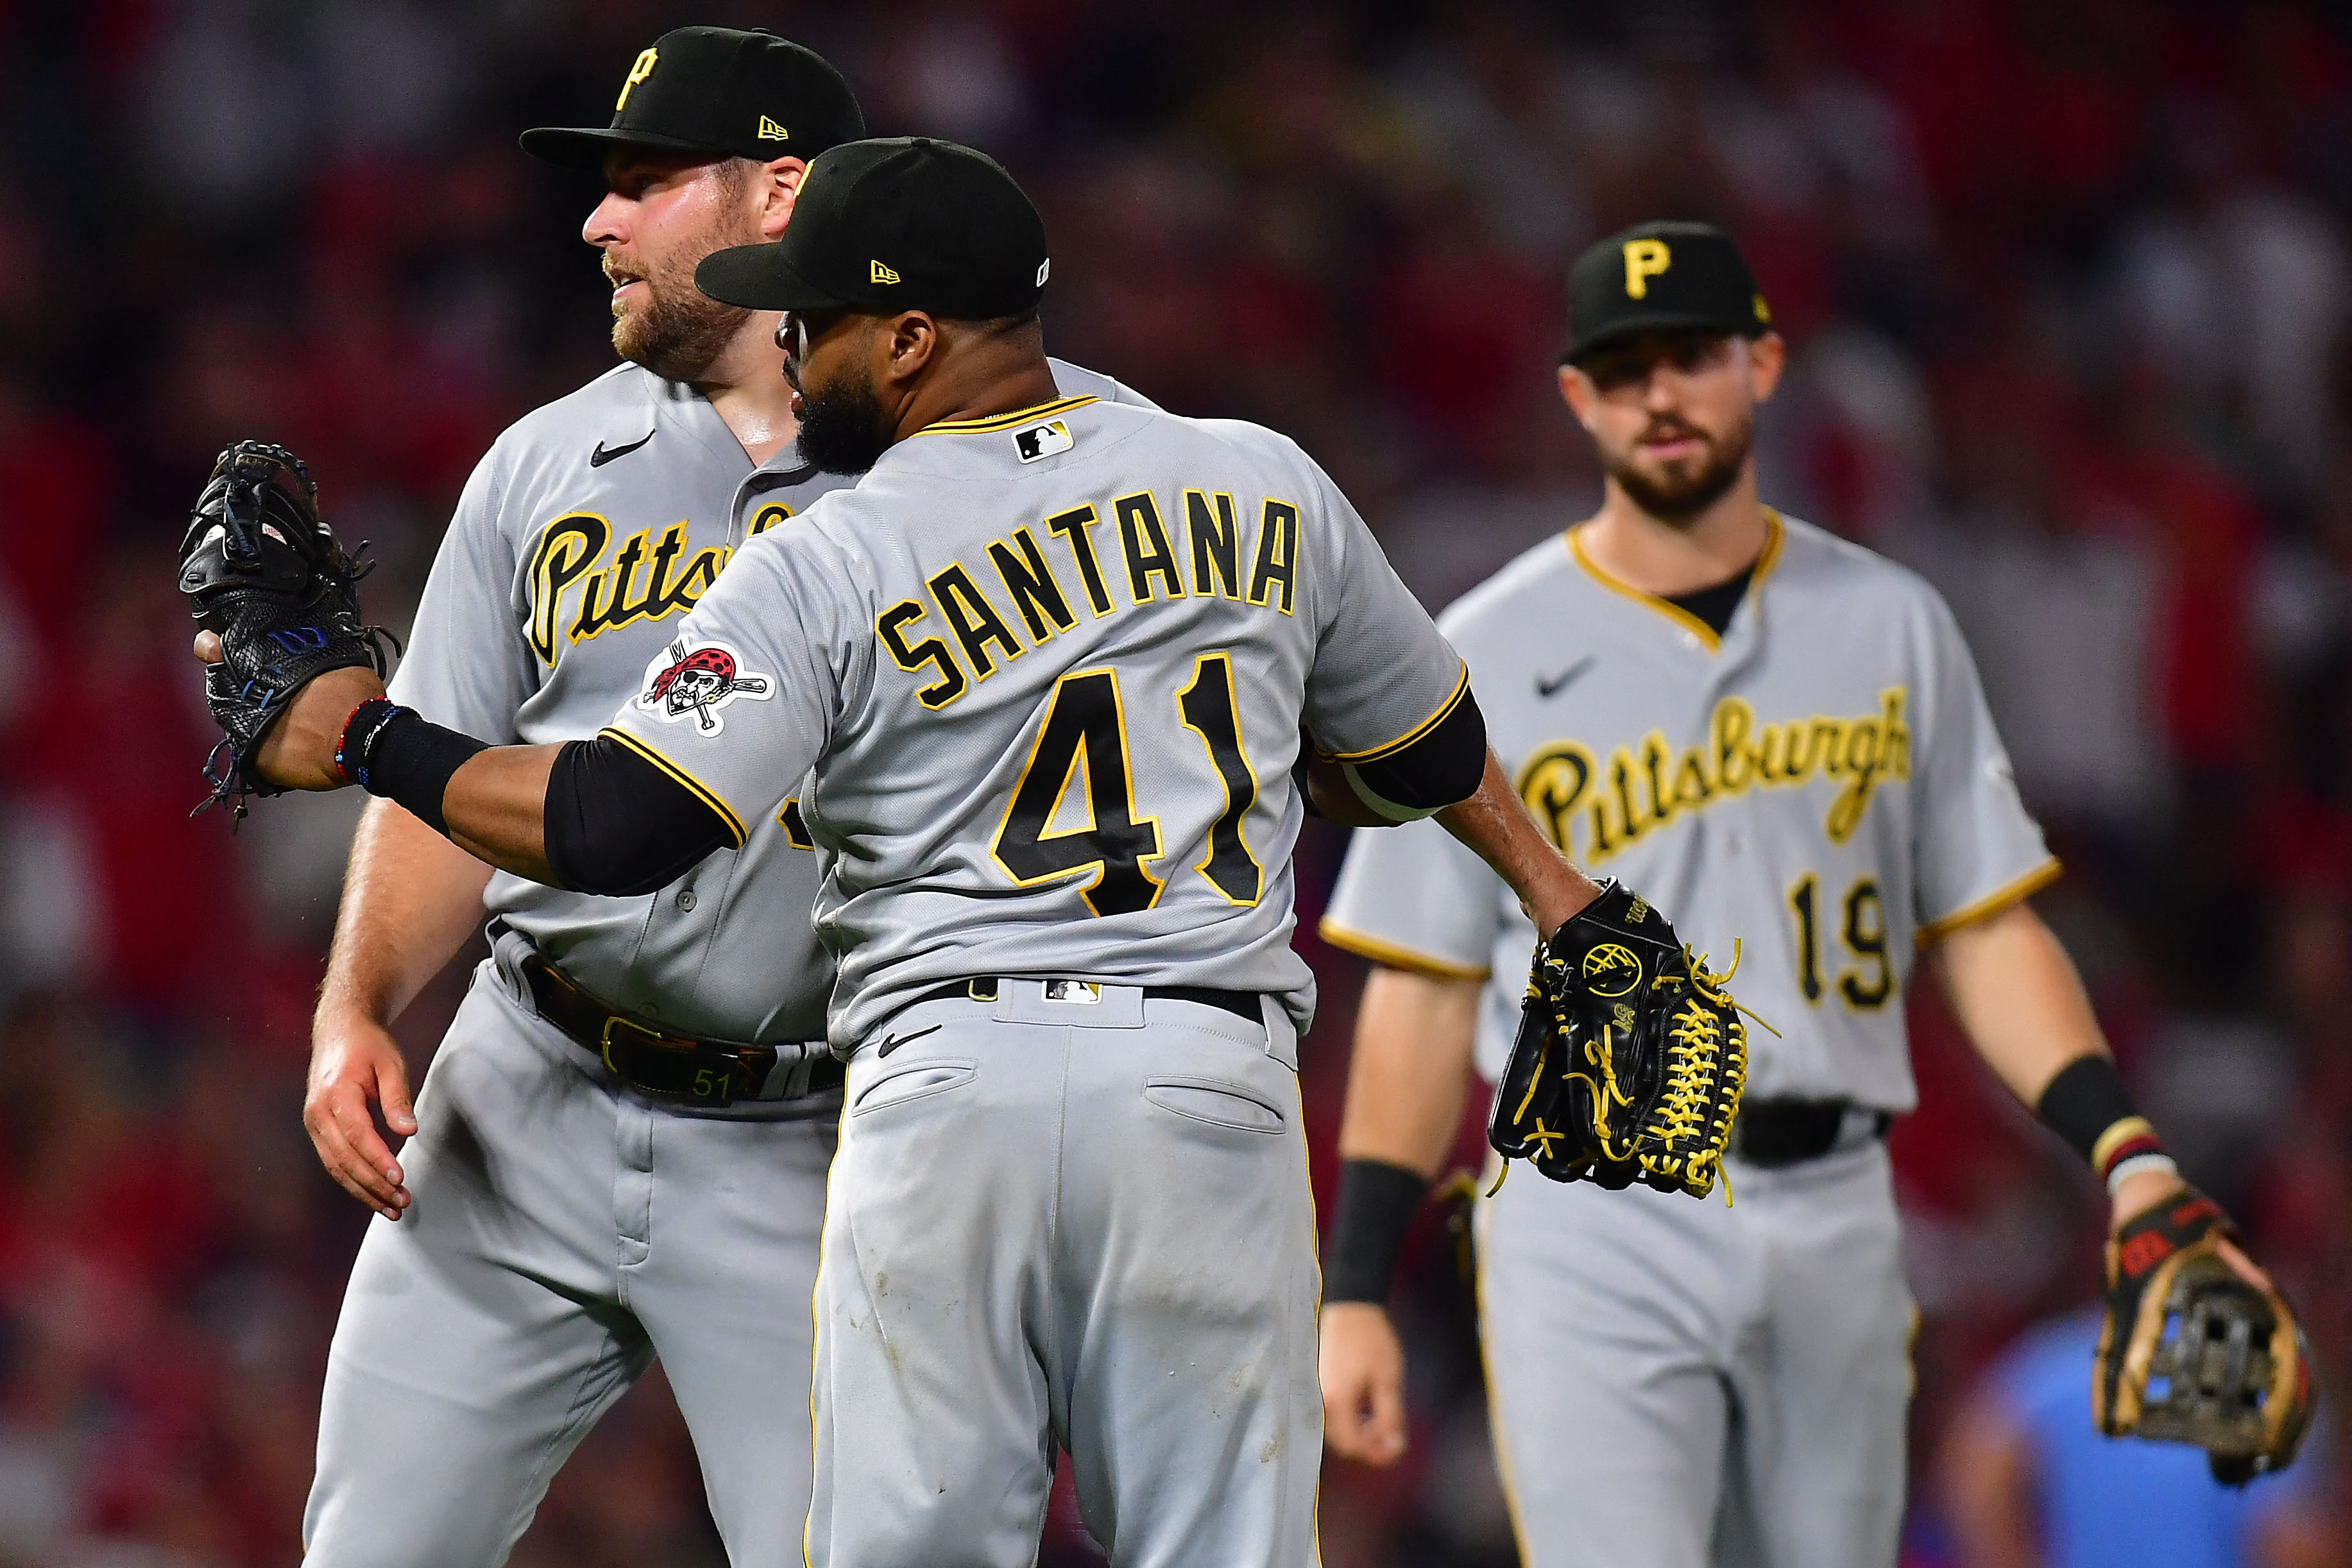 Five Pirates pitchers combine to stymie Angels